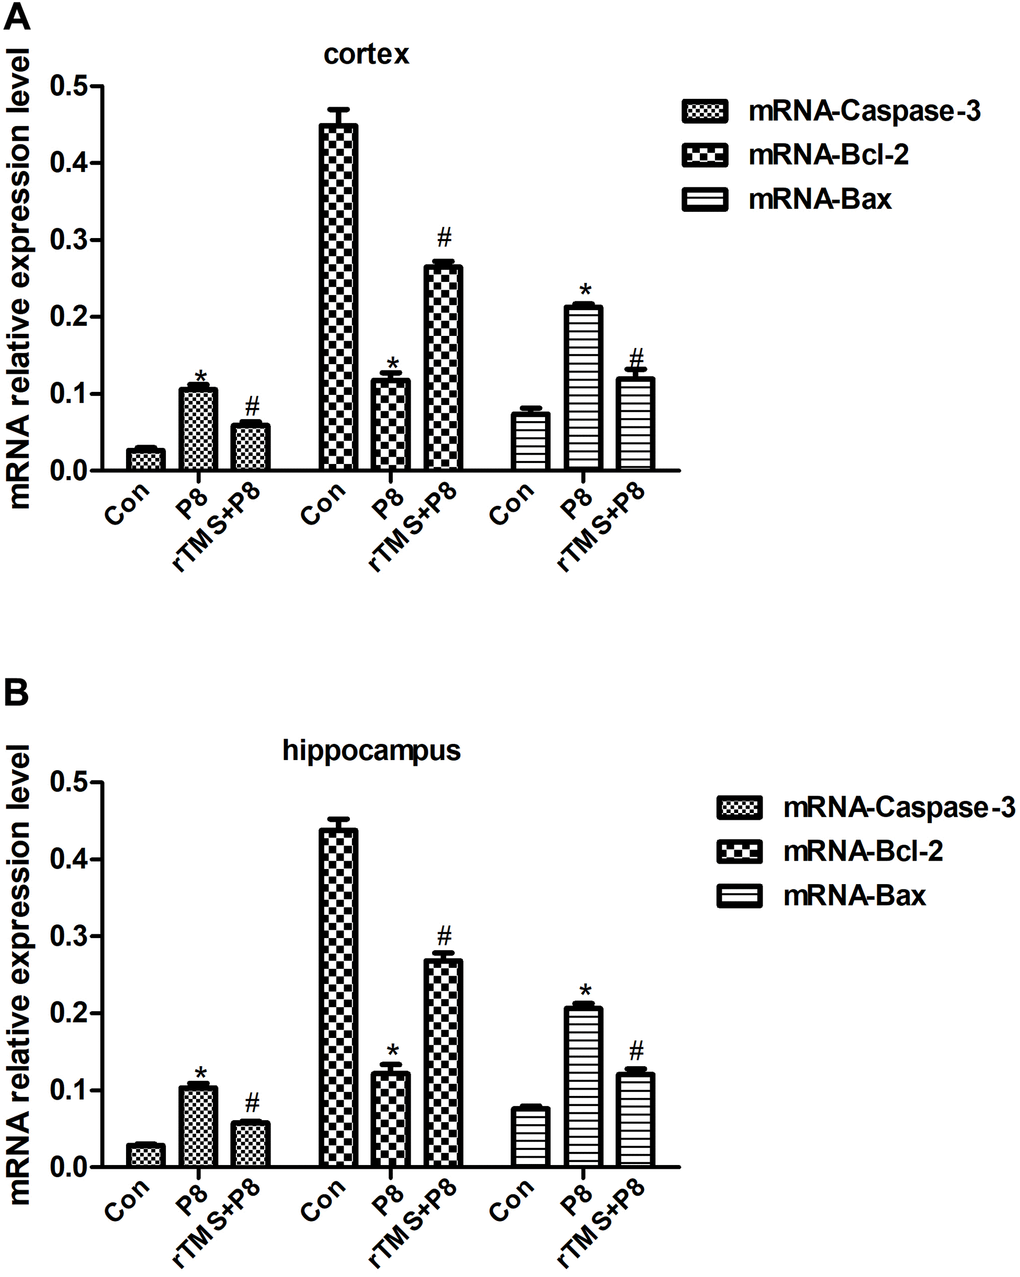 Relative Caspase-3, Bcl-2 and Bax mRNA expression in cortical and hippocampal tissues of the in three groups of mice. (A) Relative mRNA expression in mouse cortex. (B) Relative mRNA expression in mouse hippocampus. The data are presented as the mean ± standard deviation (n =5). *P 